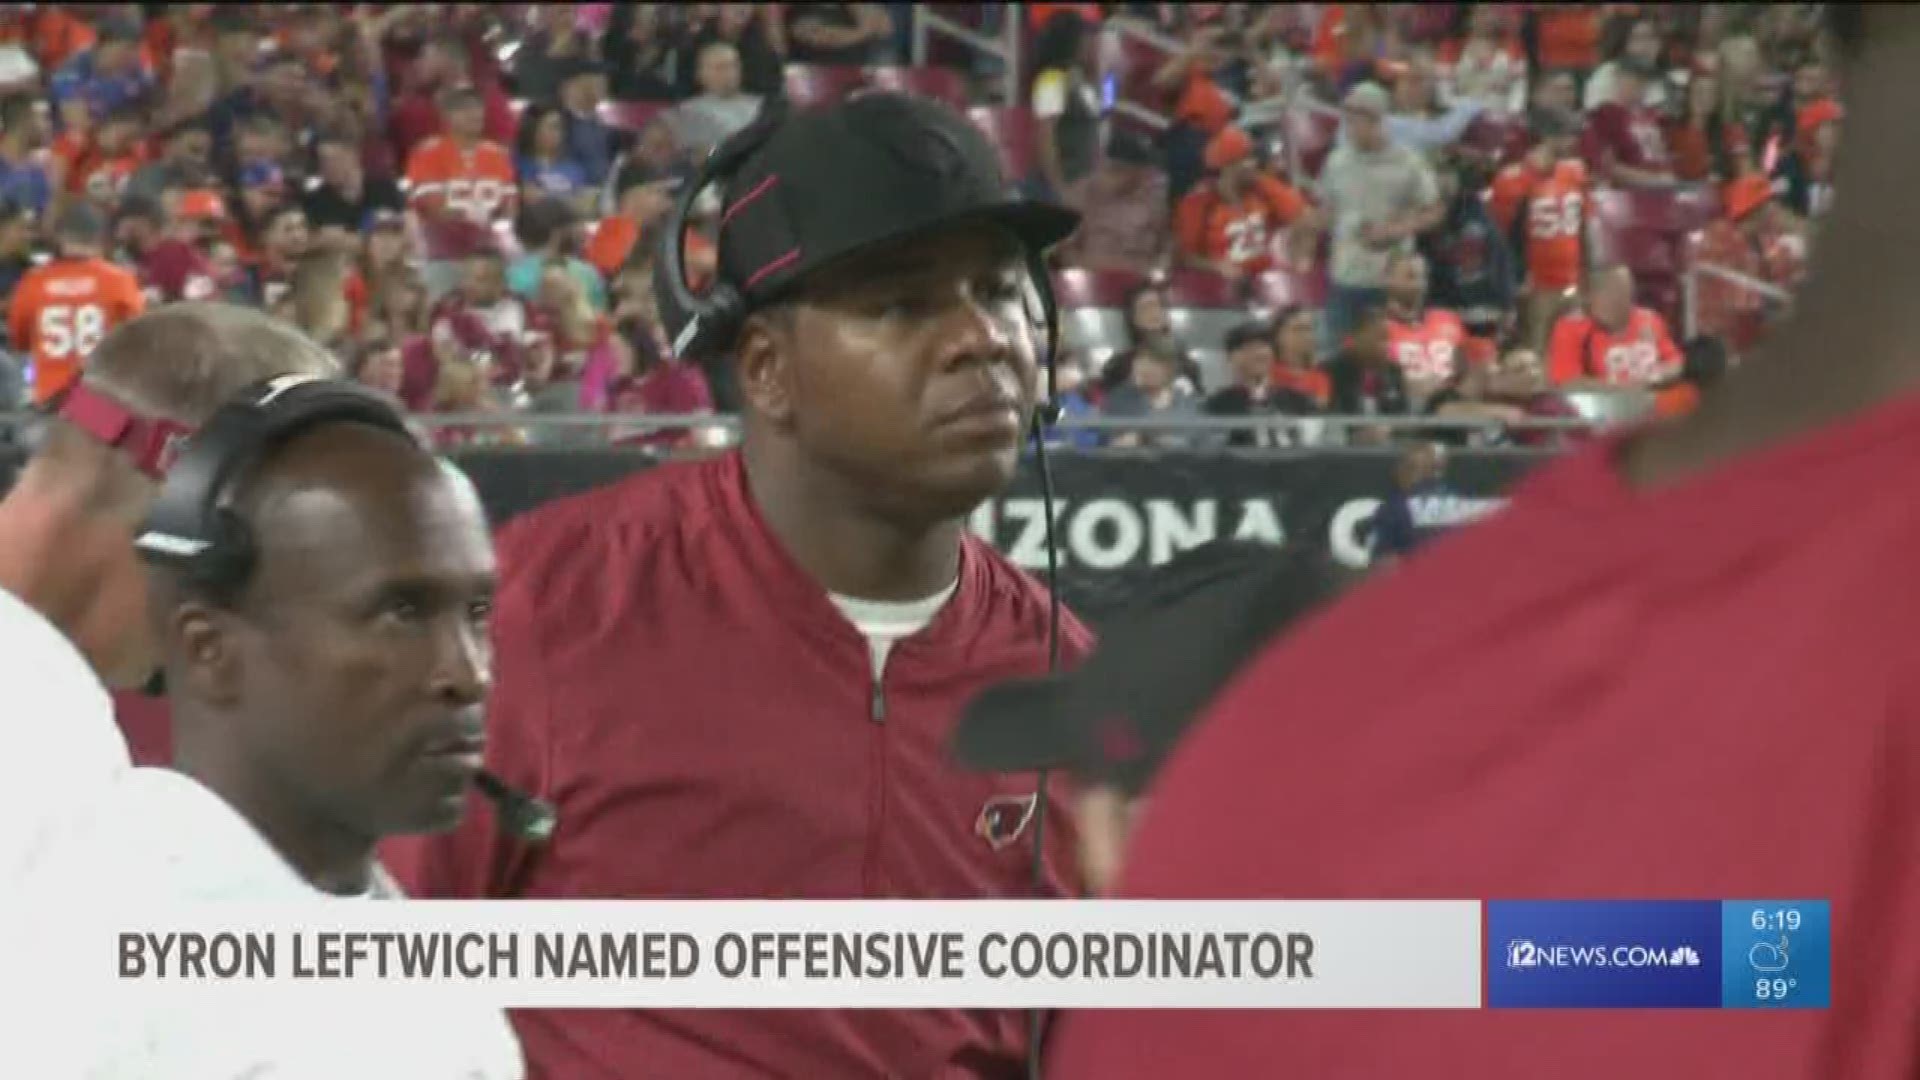 12 Sports' Cameron Cox spoke with former Cardinals head coach Bruce Arians on the decision by the Cardinals to promote Leftwich.